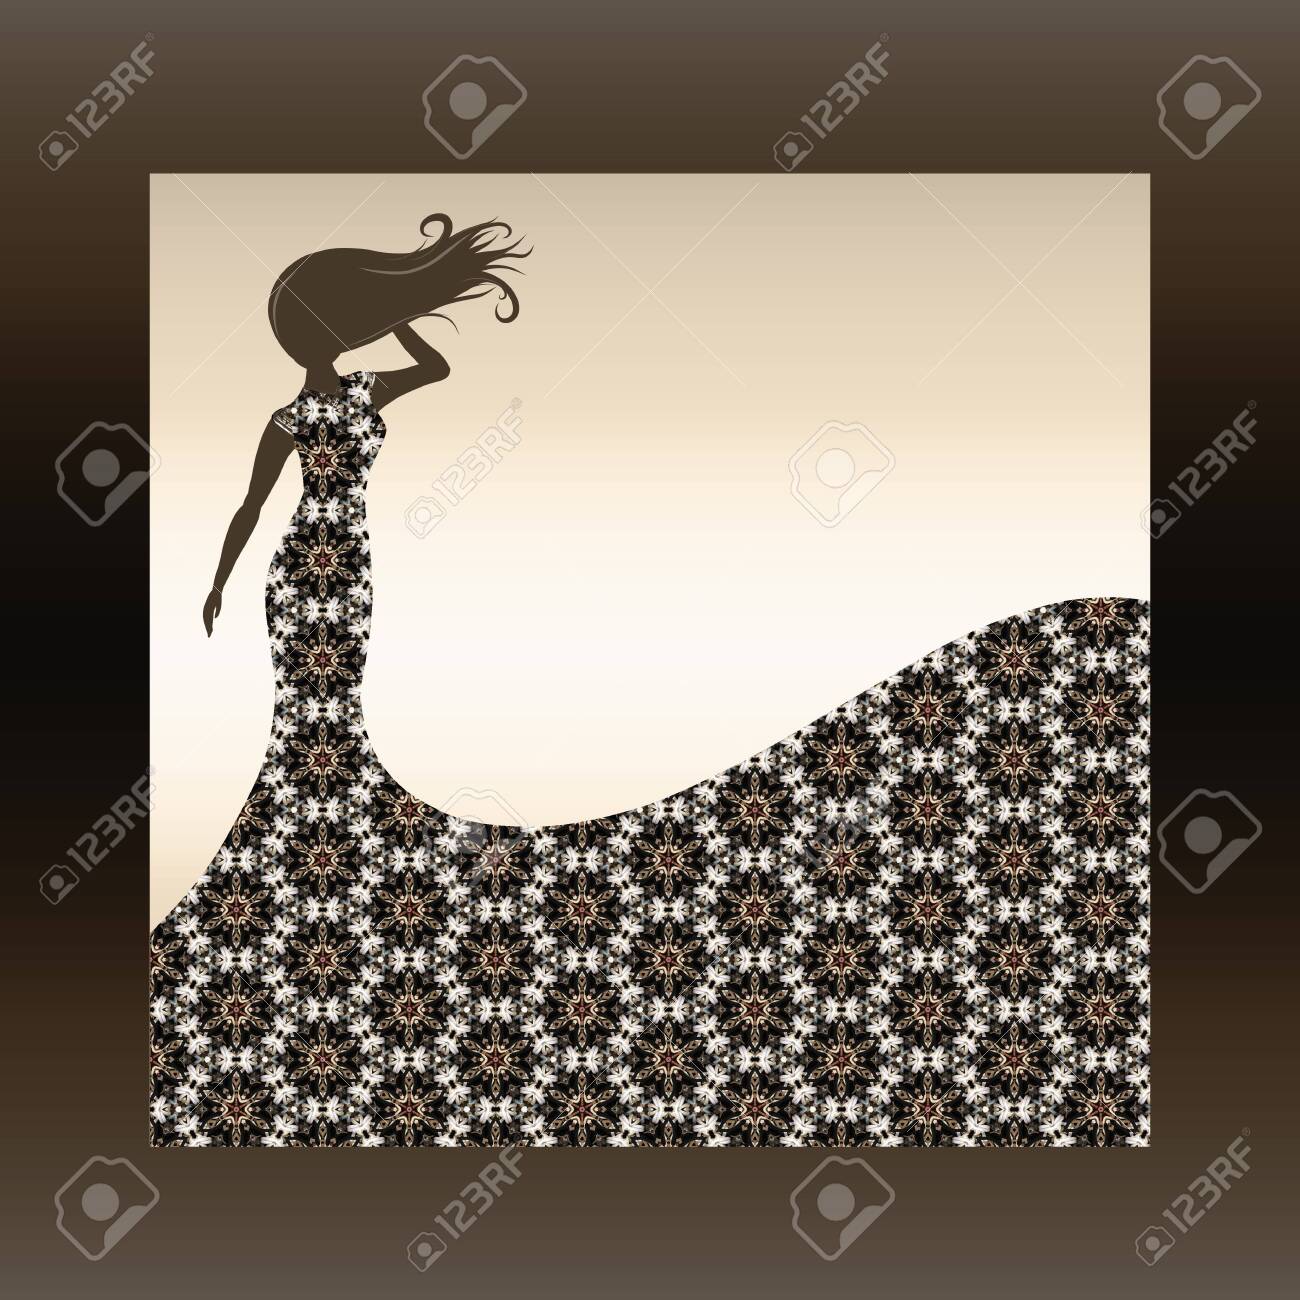 Background With A Silhouette Of Slender Woman In Patterned